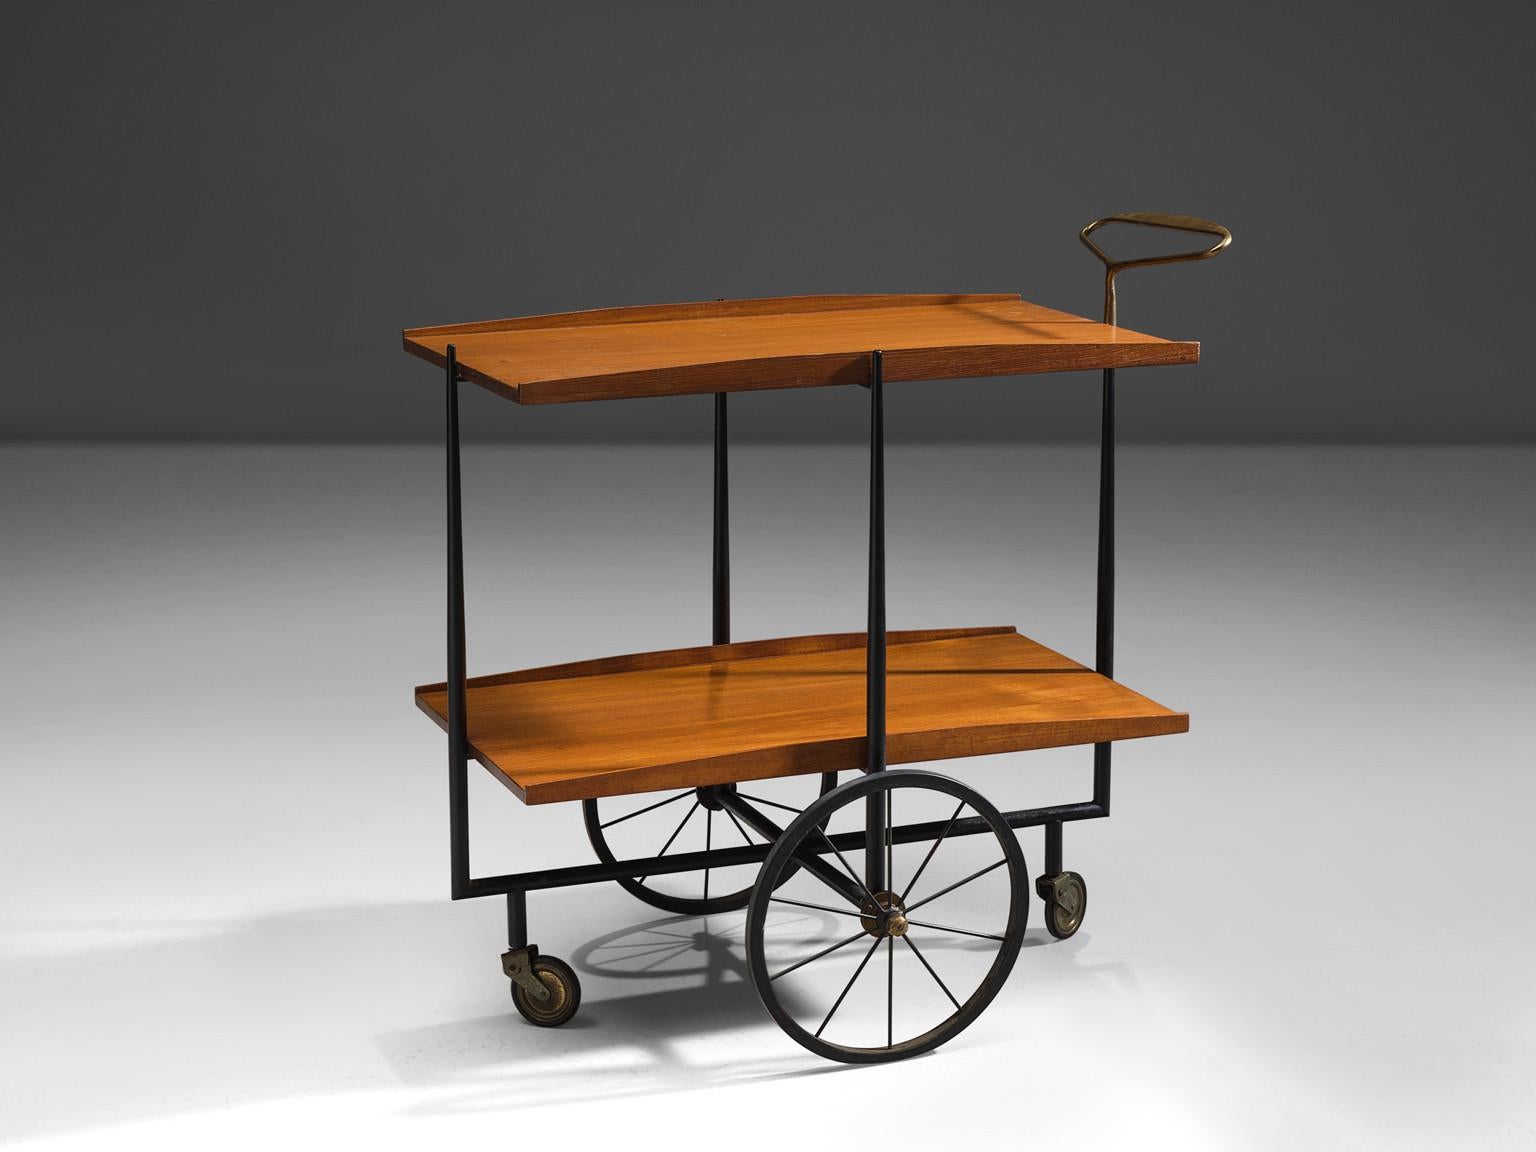 Italian serving cart in wood with brass details, Italy, 1950s.

This lovely trolley features two wooden trays with upstanding edges. The combination of the soft colored wood with the metal and the brass detailing is typical midcentury. Because of